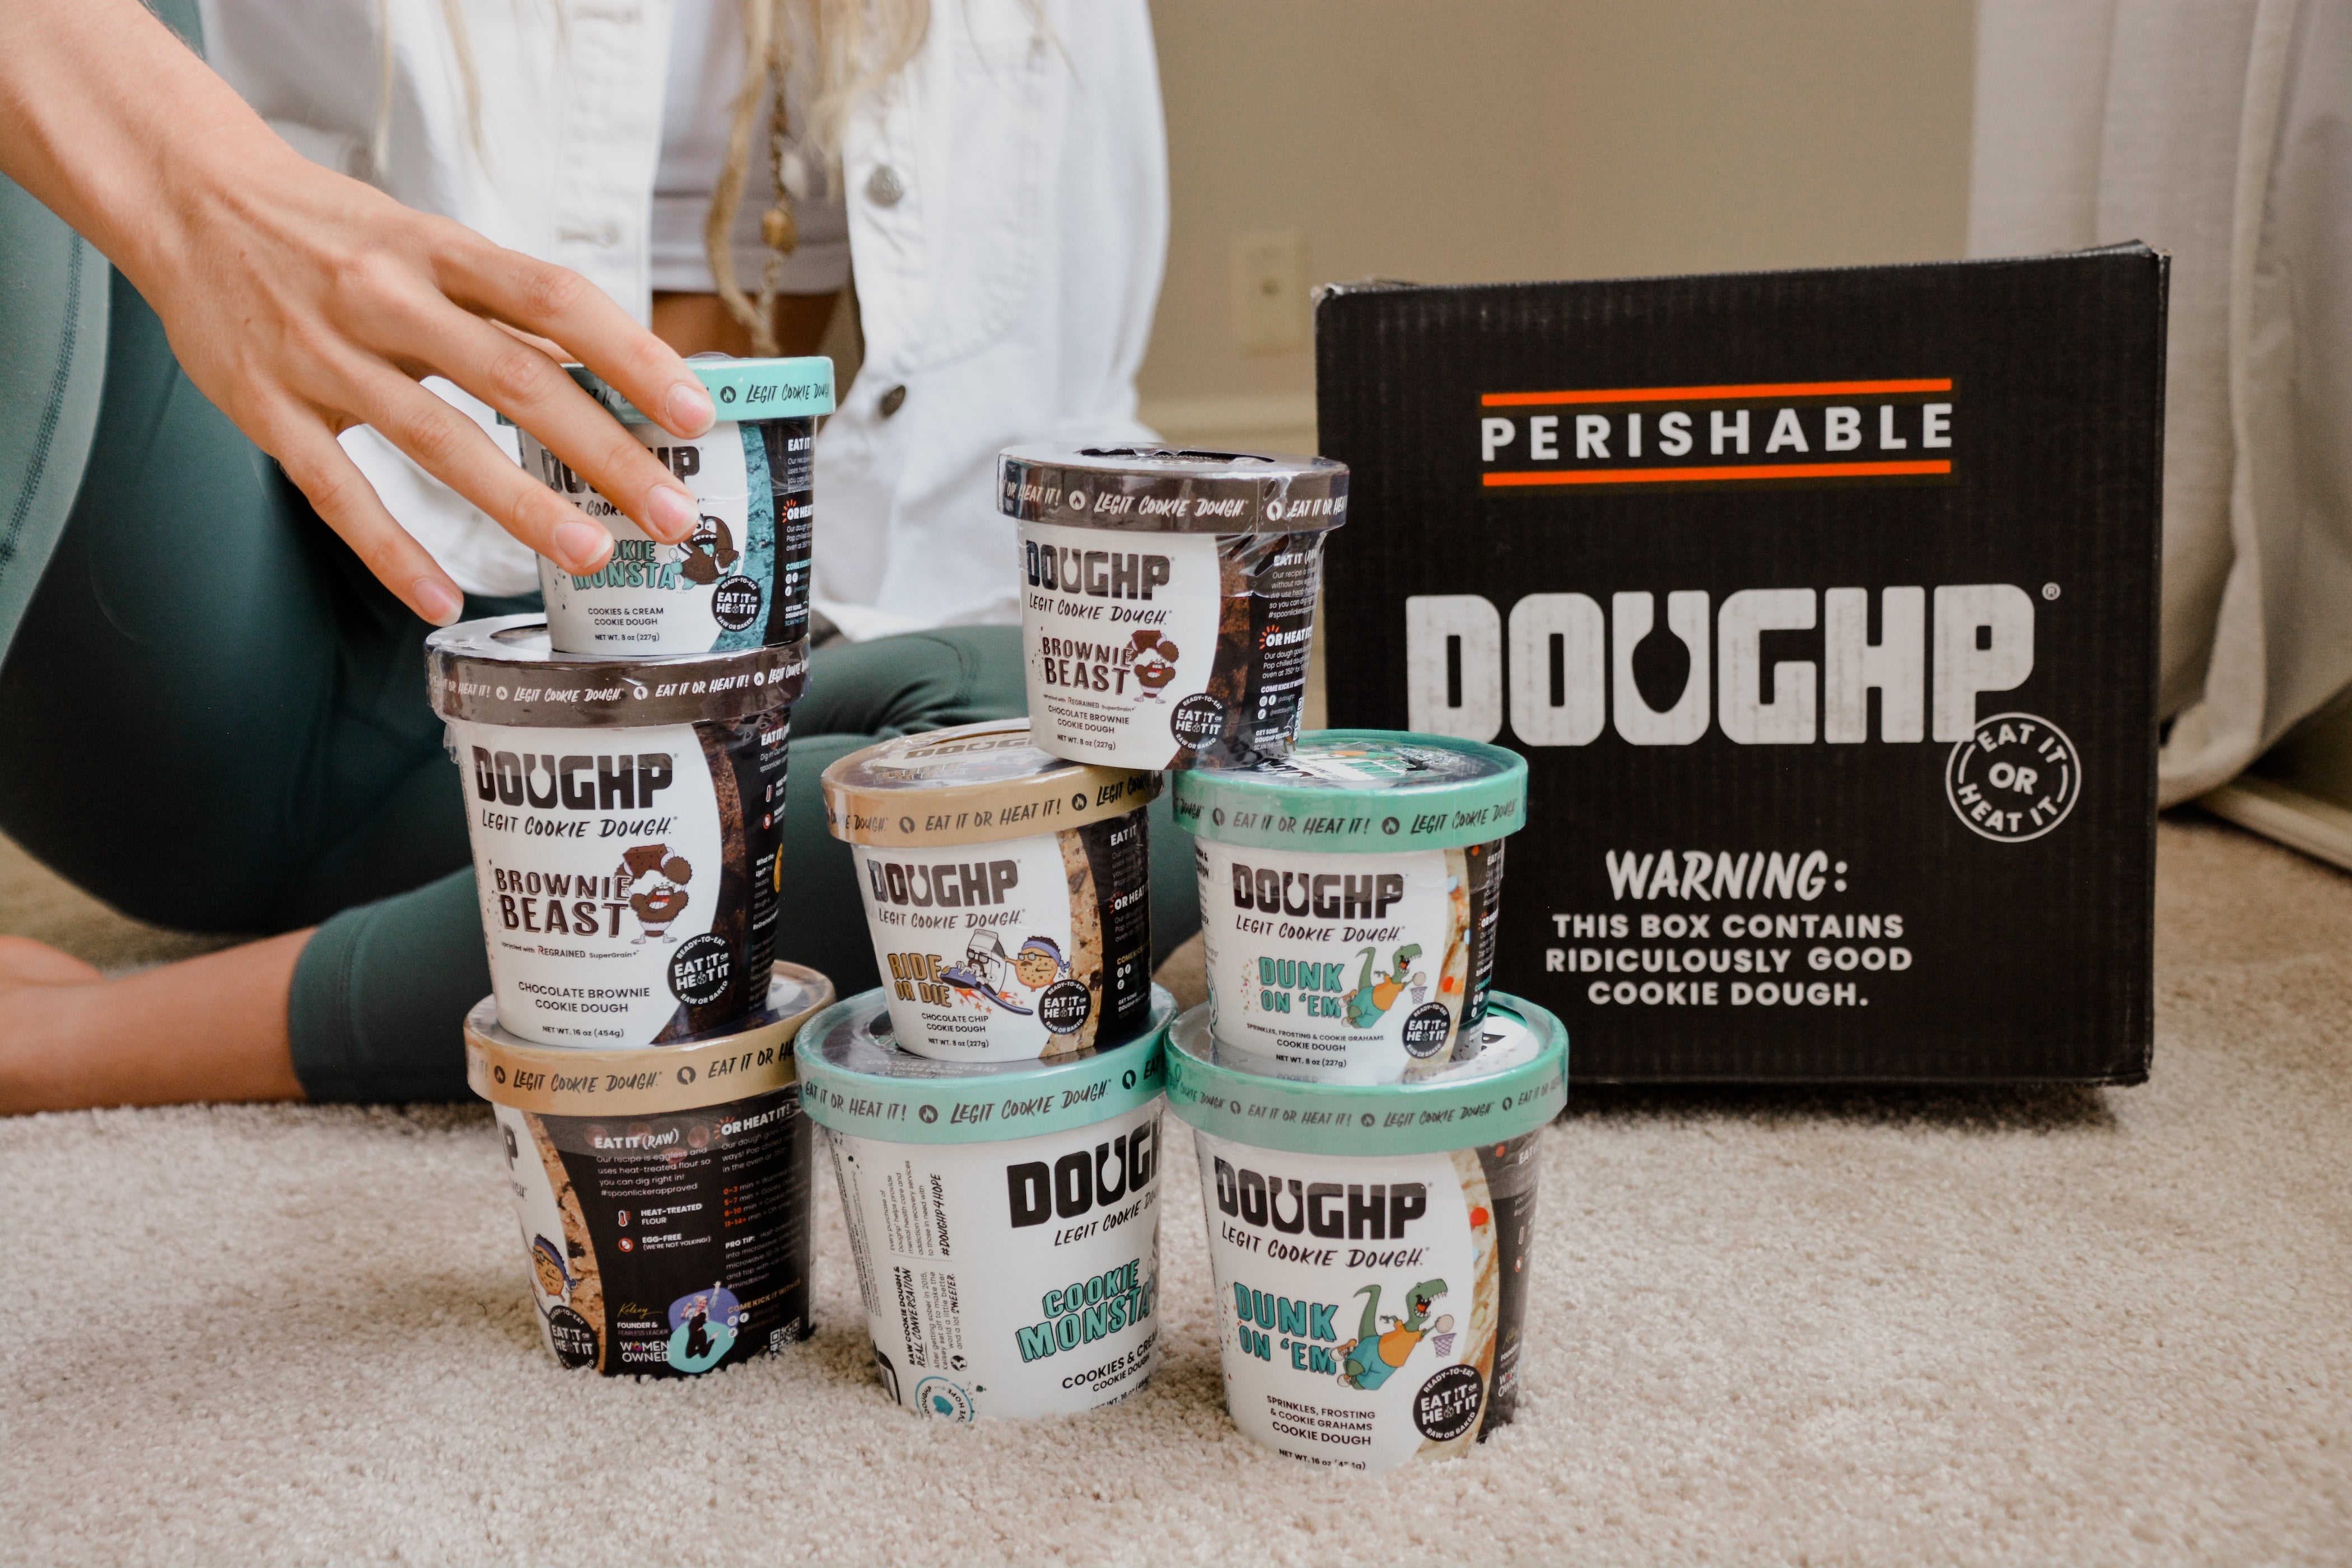 How to Indulge Big Time with Doughp's Cookie Dough